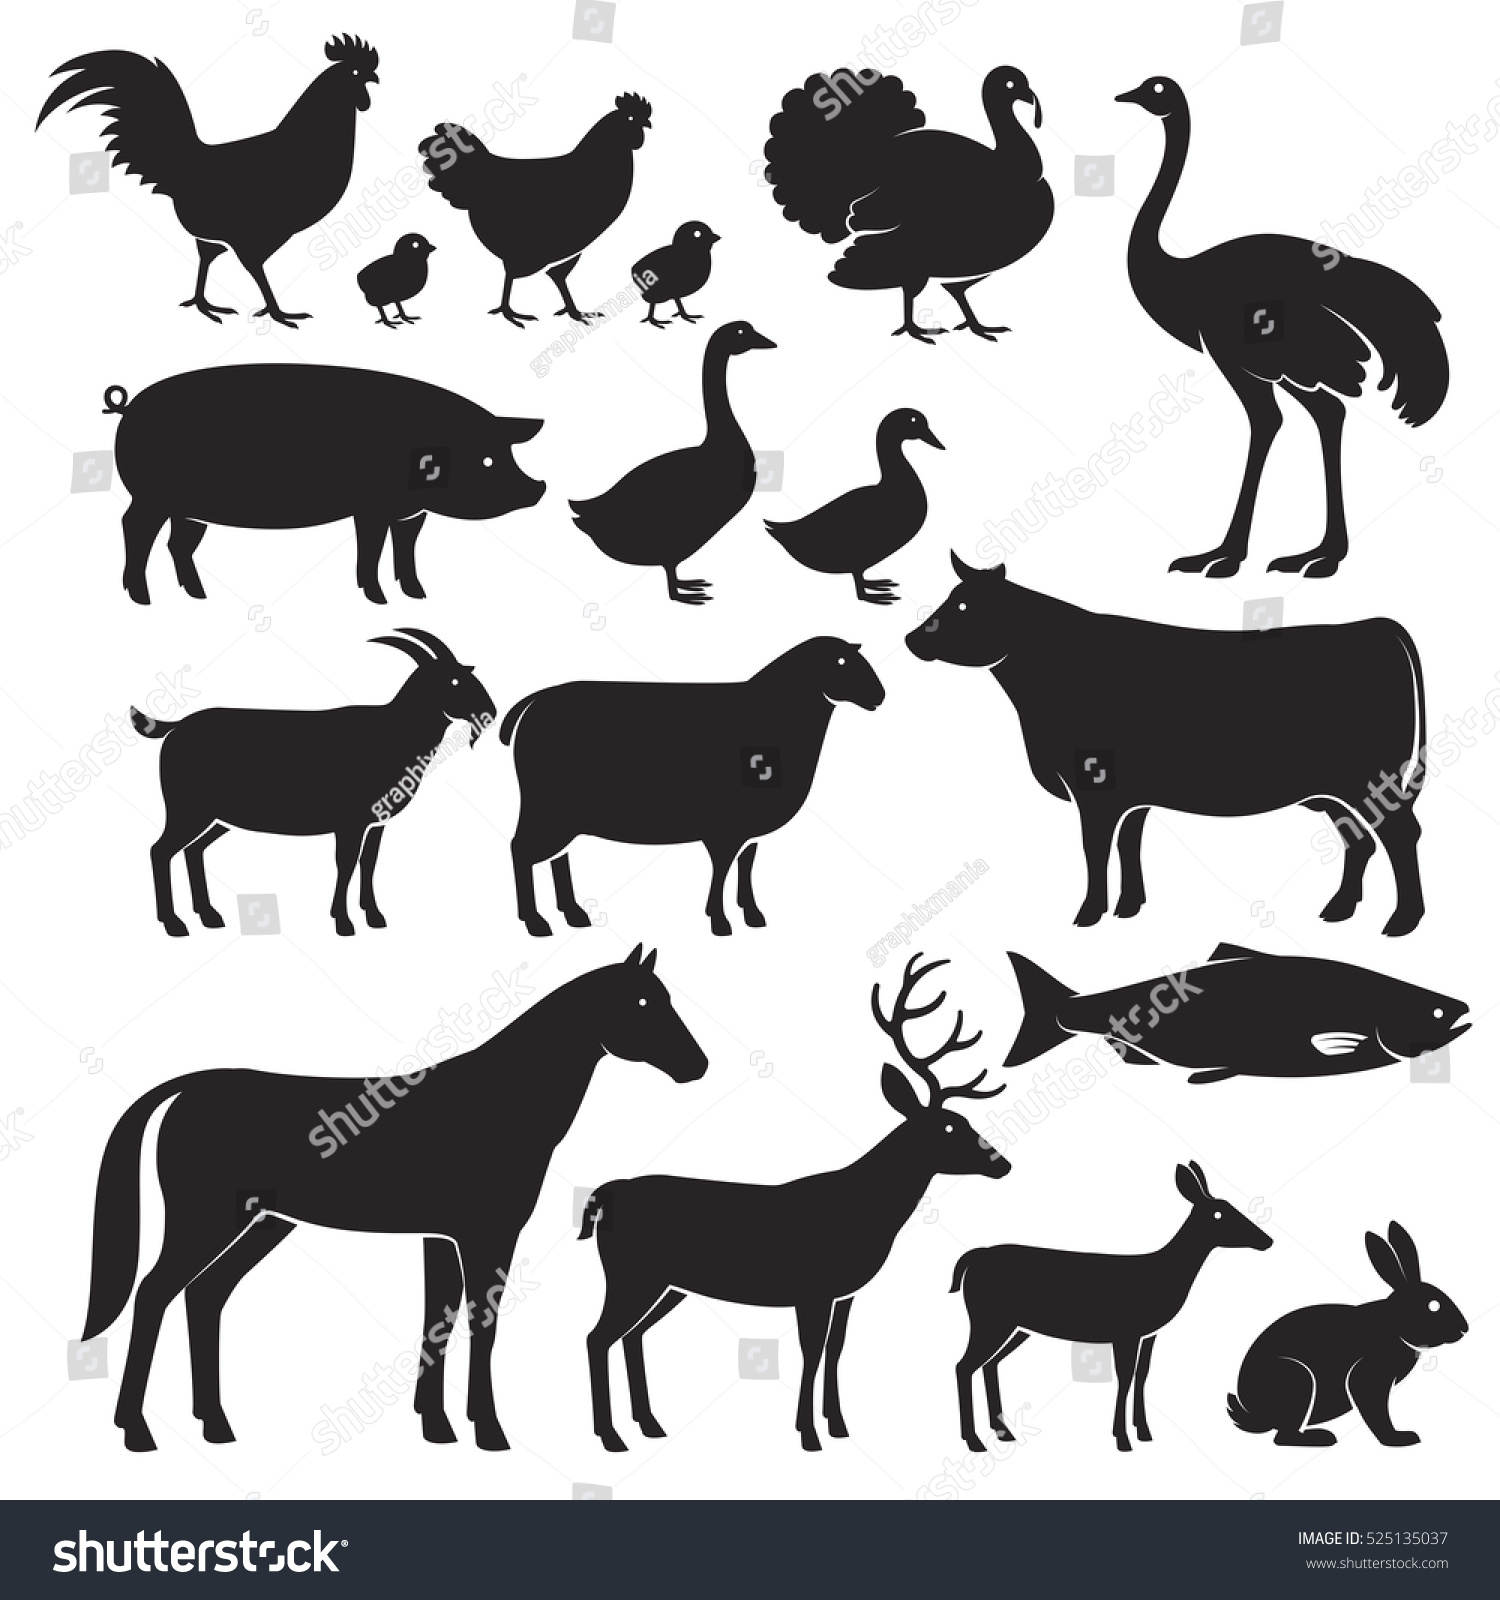 Download Farm Animals Silhouette Icons Vector Illustrations Stock ...